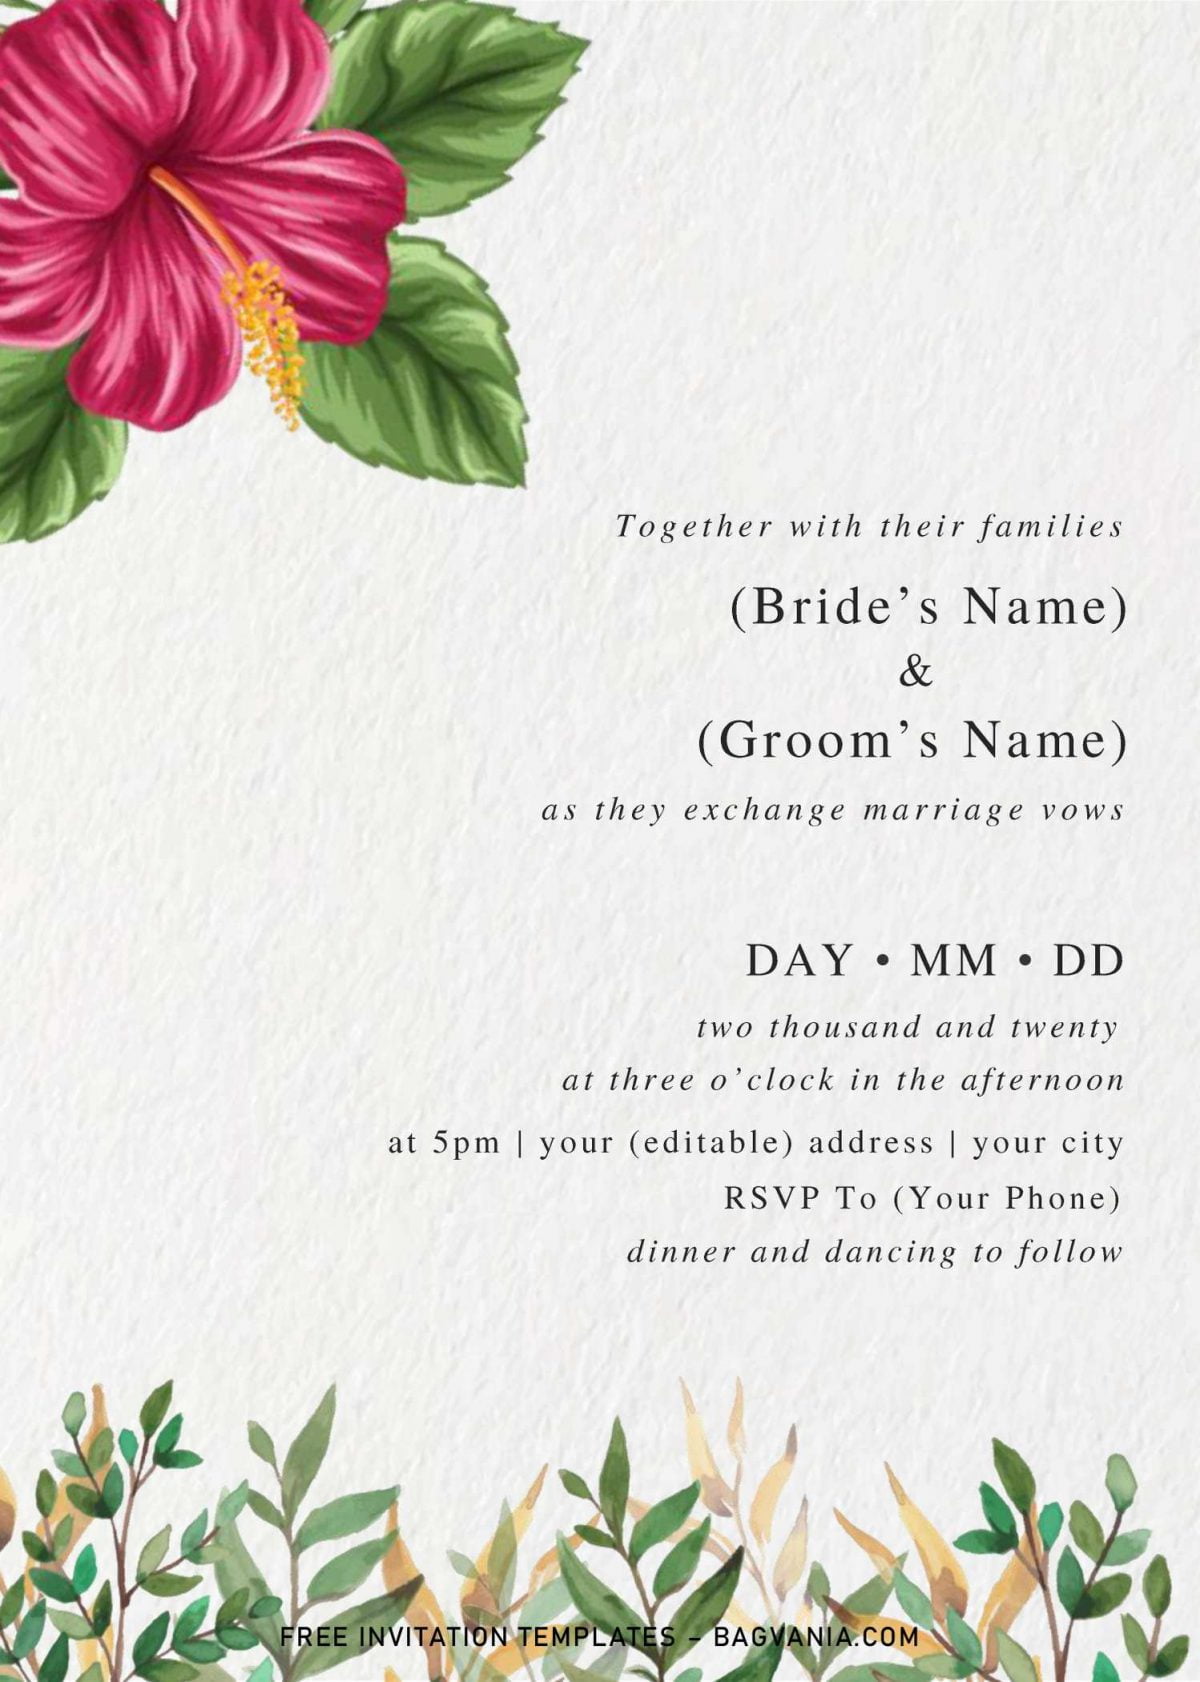 Modern Tropical Wedding Invitation Templates - Editable With MS Word and has green eucalyptus leaves